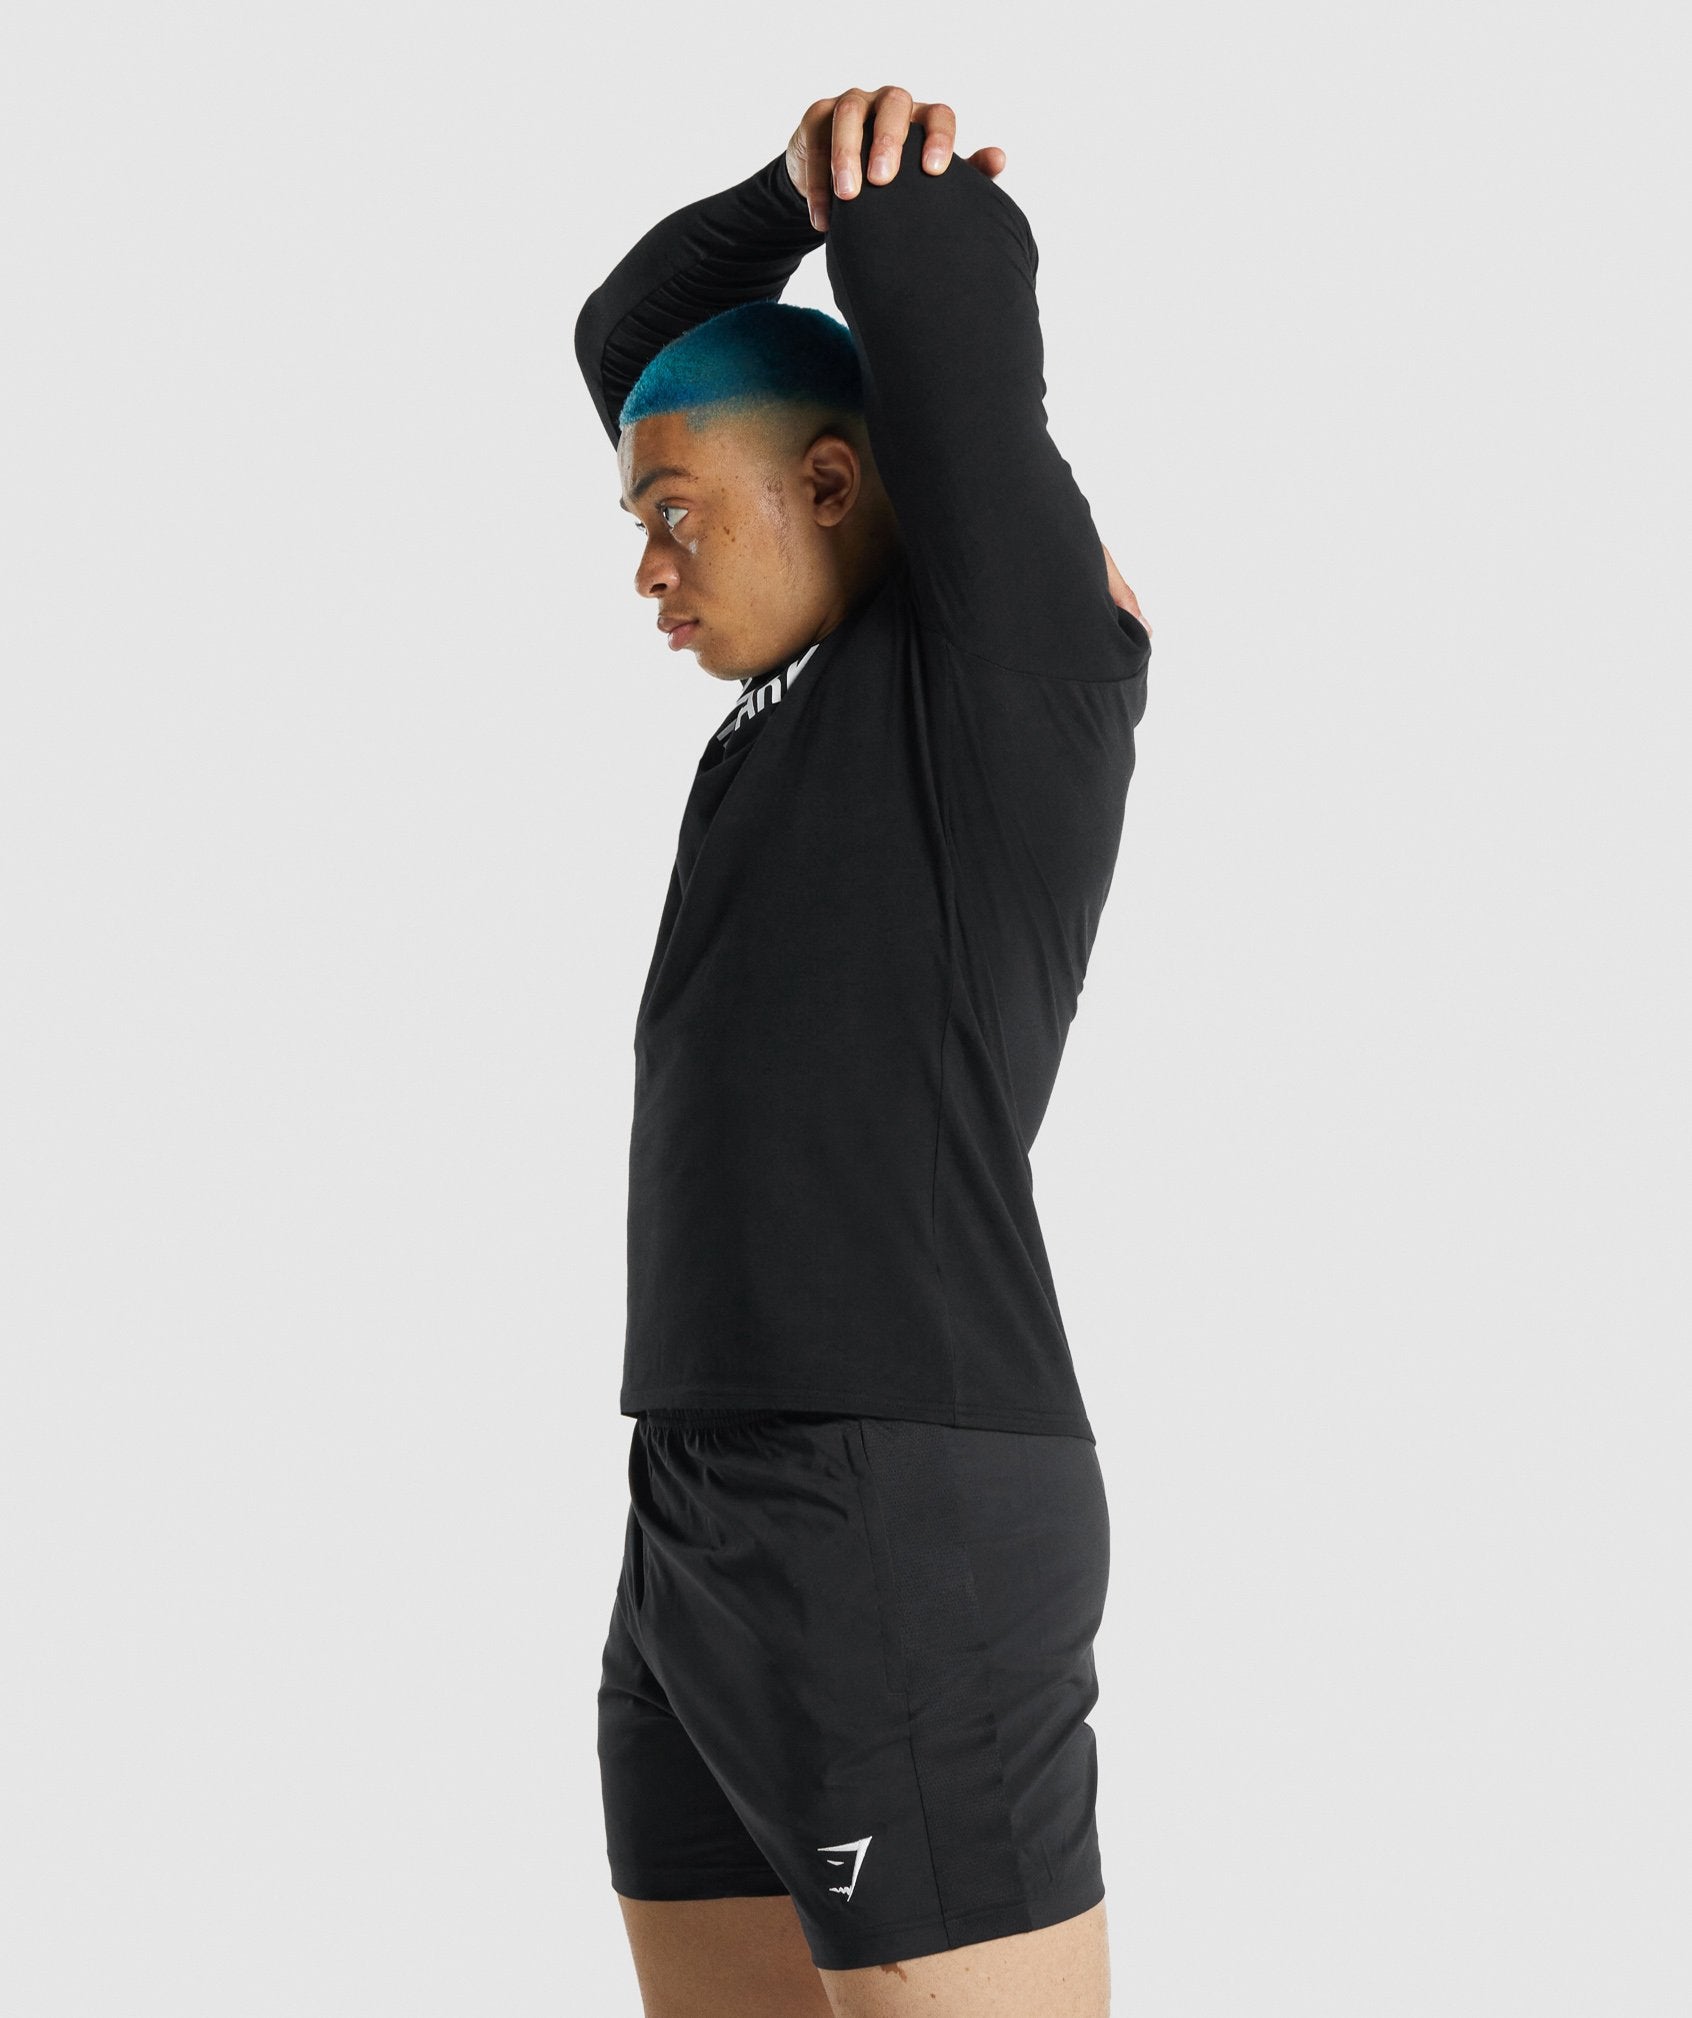 Apollo Long Sleeve T-Shirt in Black - view 4